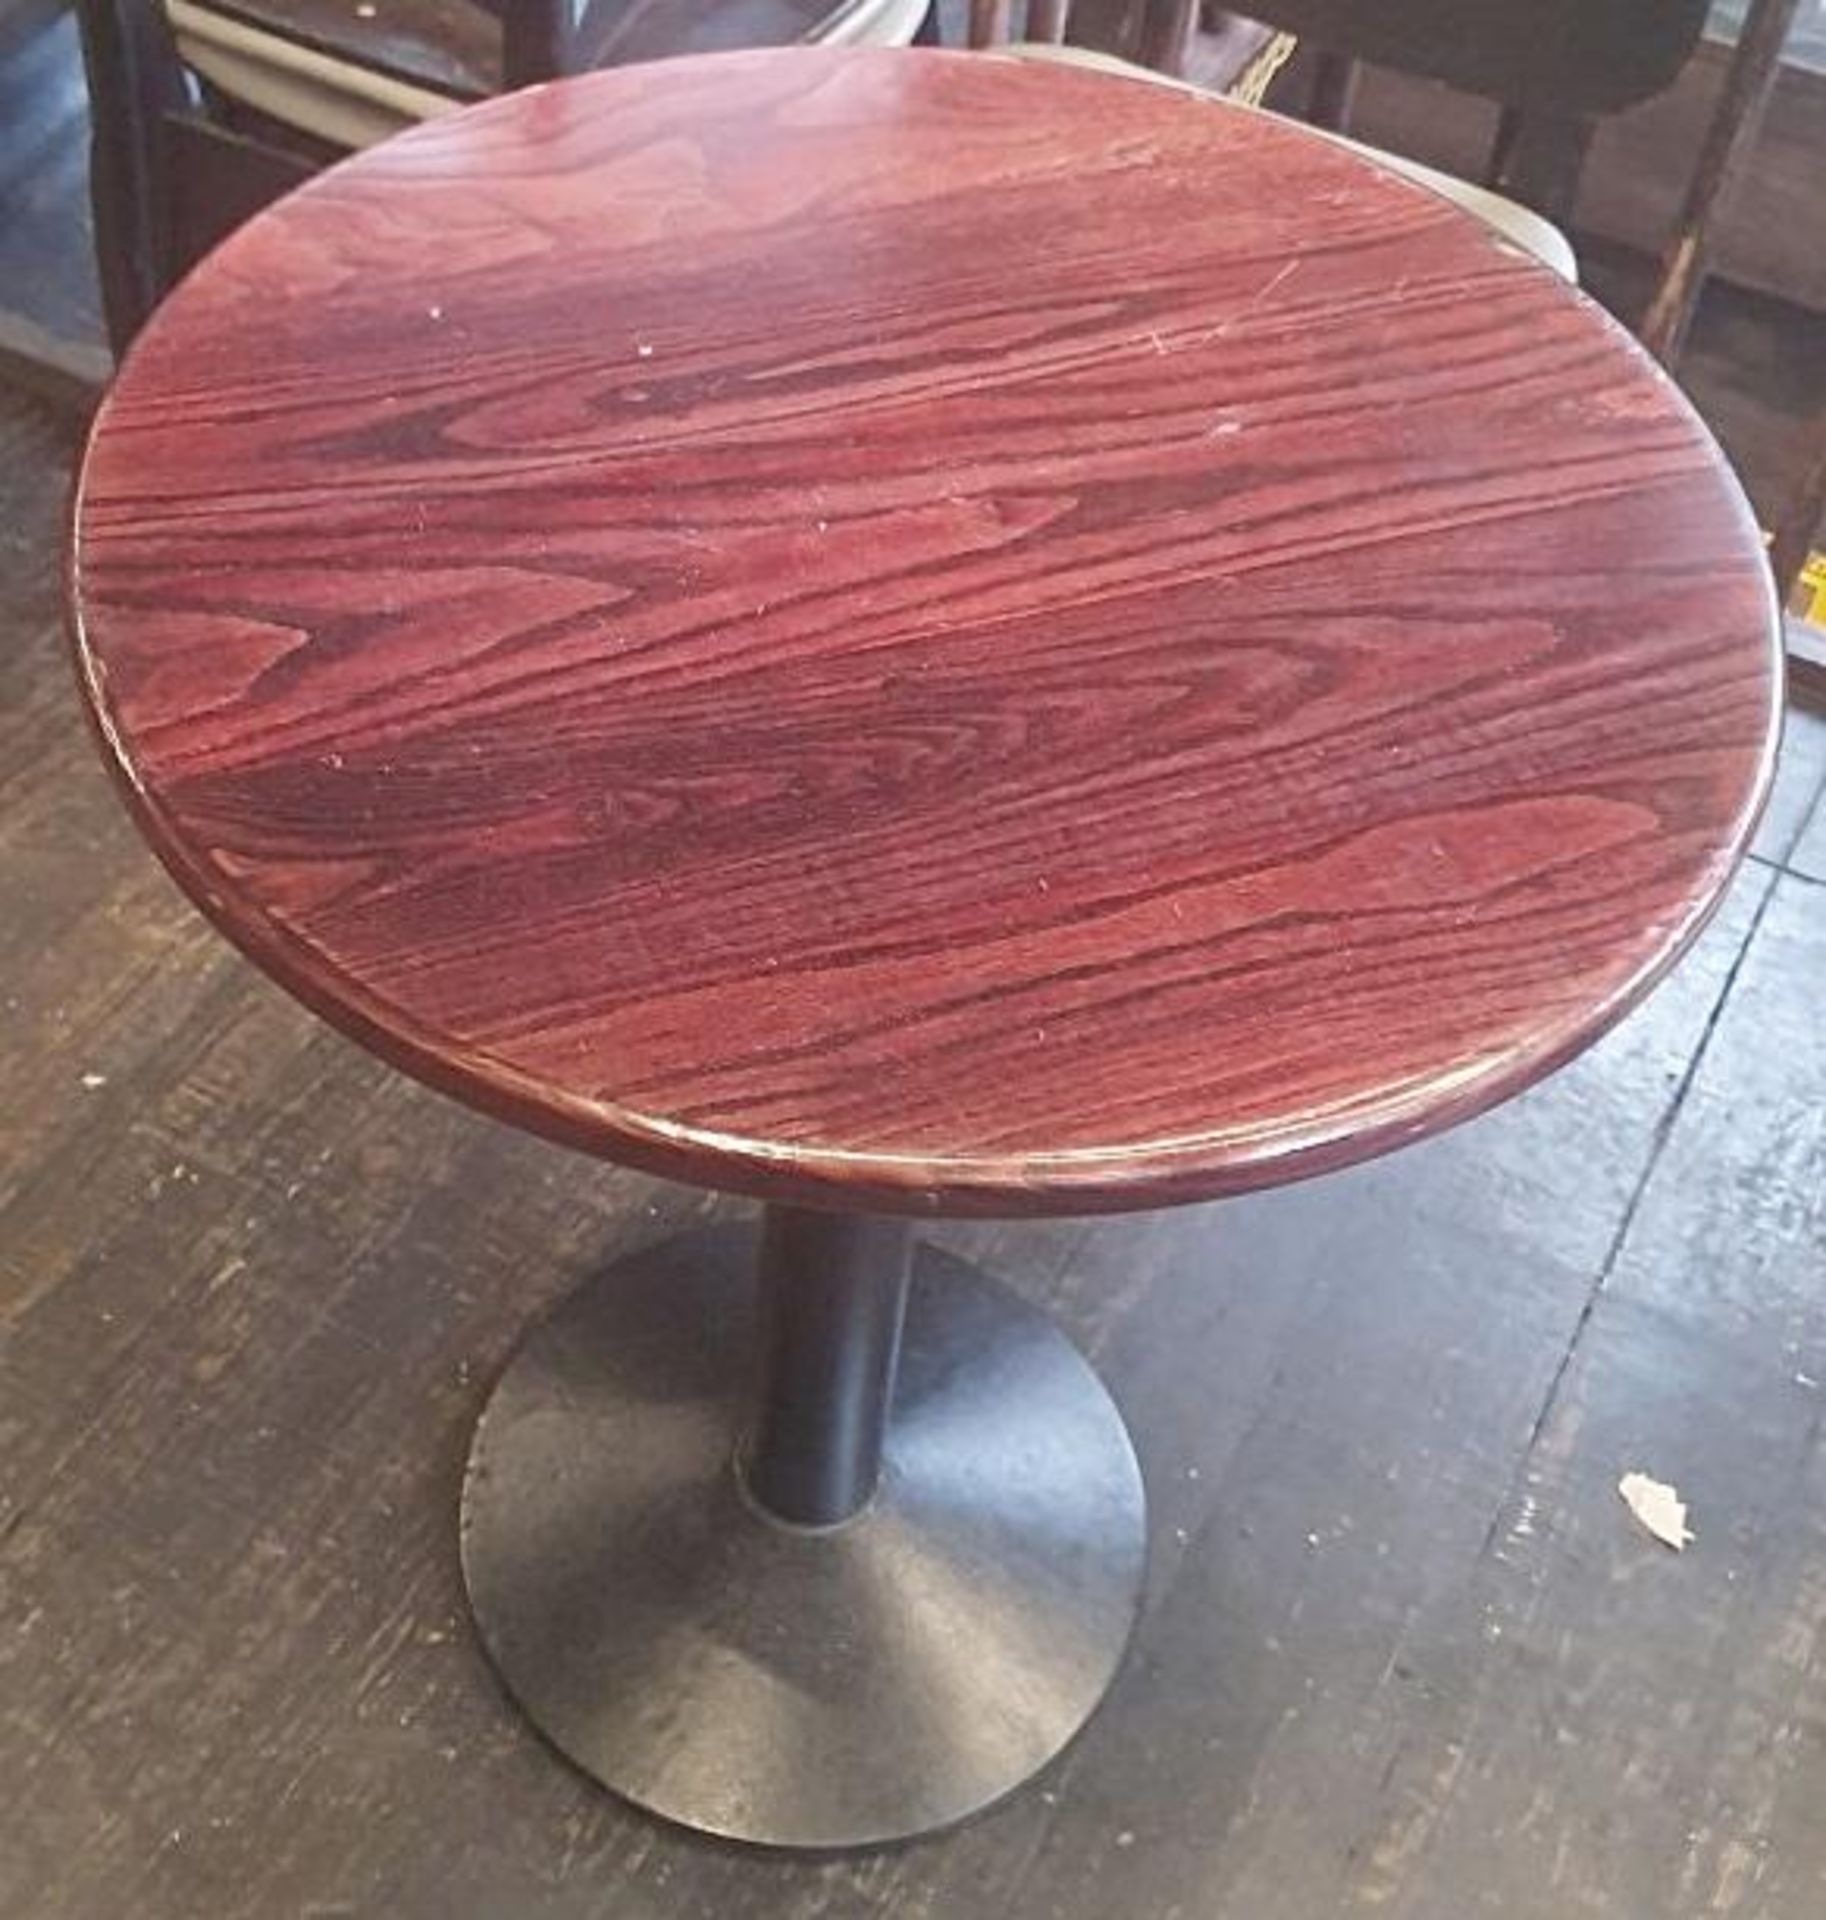 3 x Round Bistro Tables With Cherry Wood Tops - Dimensions: Diameter 61cm, Height 77cm - Recently Ta - Image 2 of 3